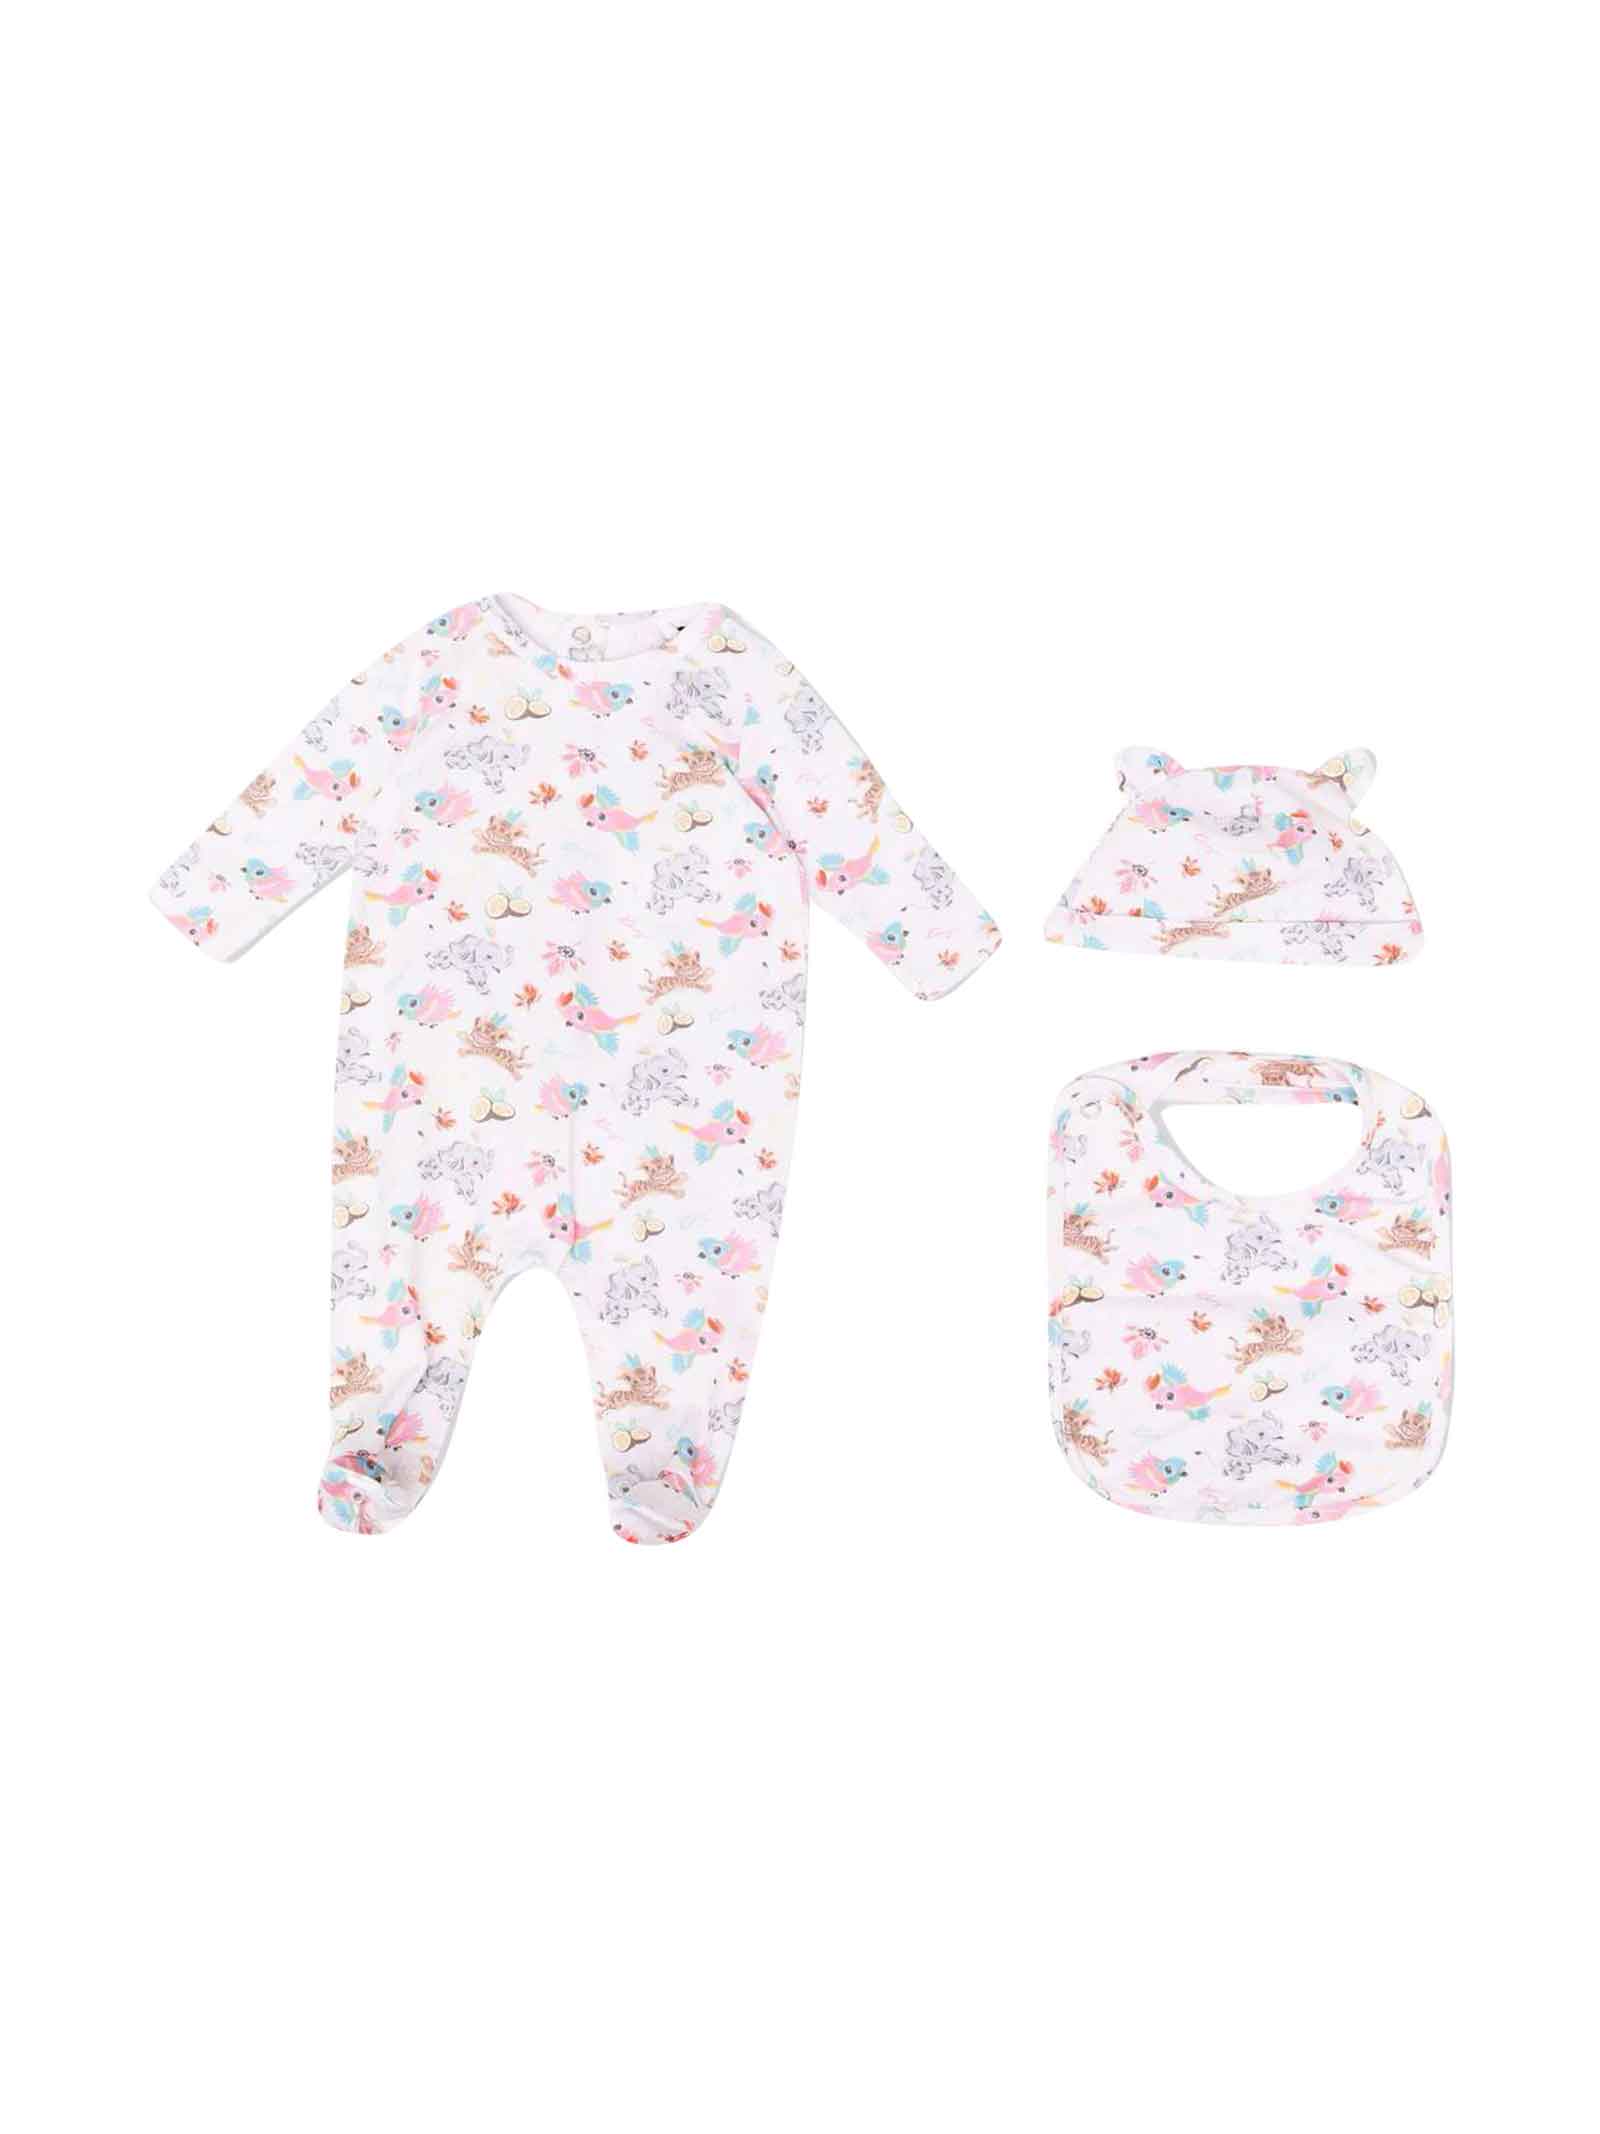 Kenzo Kids Pink Baby Girl Romper, Hat And Bib Set With All-over Jungle Animal Print, Round Neck Jumpsuit, Long Sleeves And Snap Button Closure By.